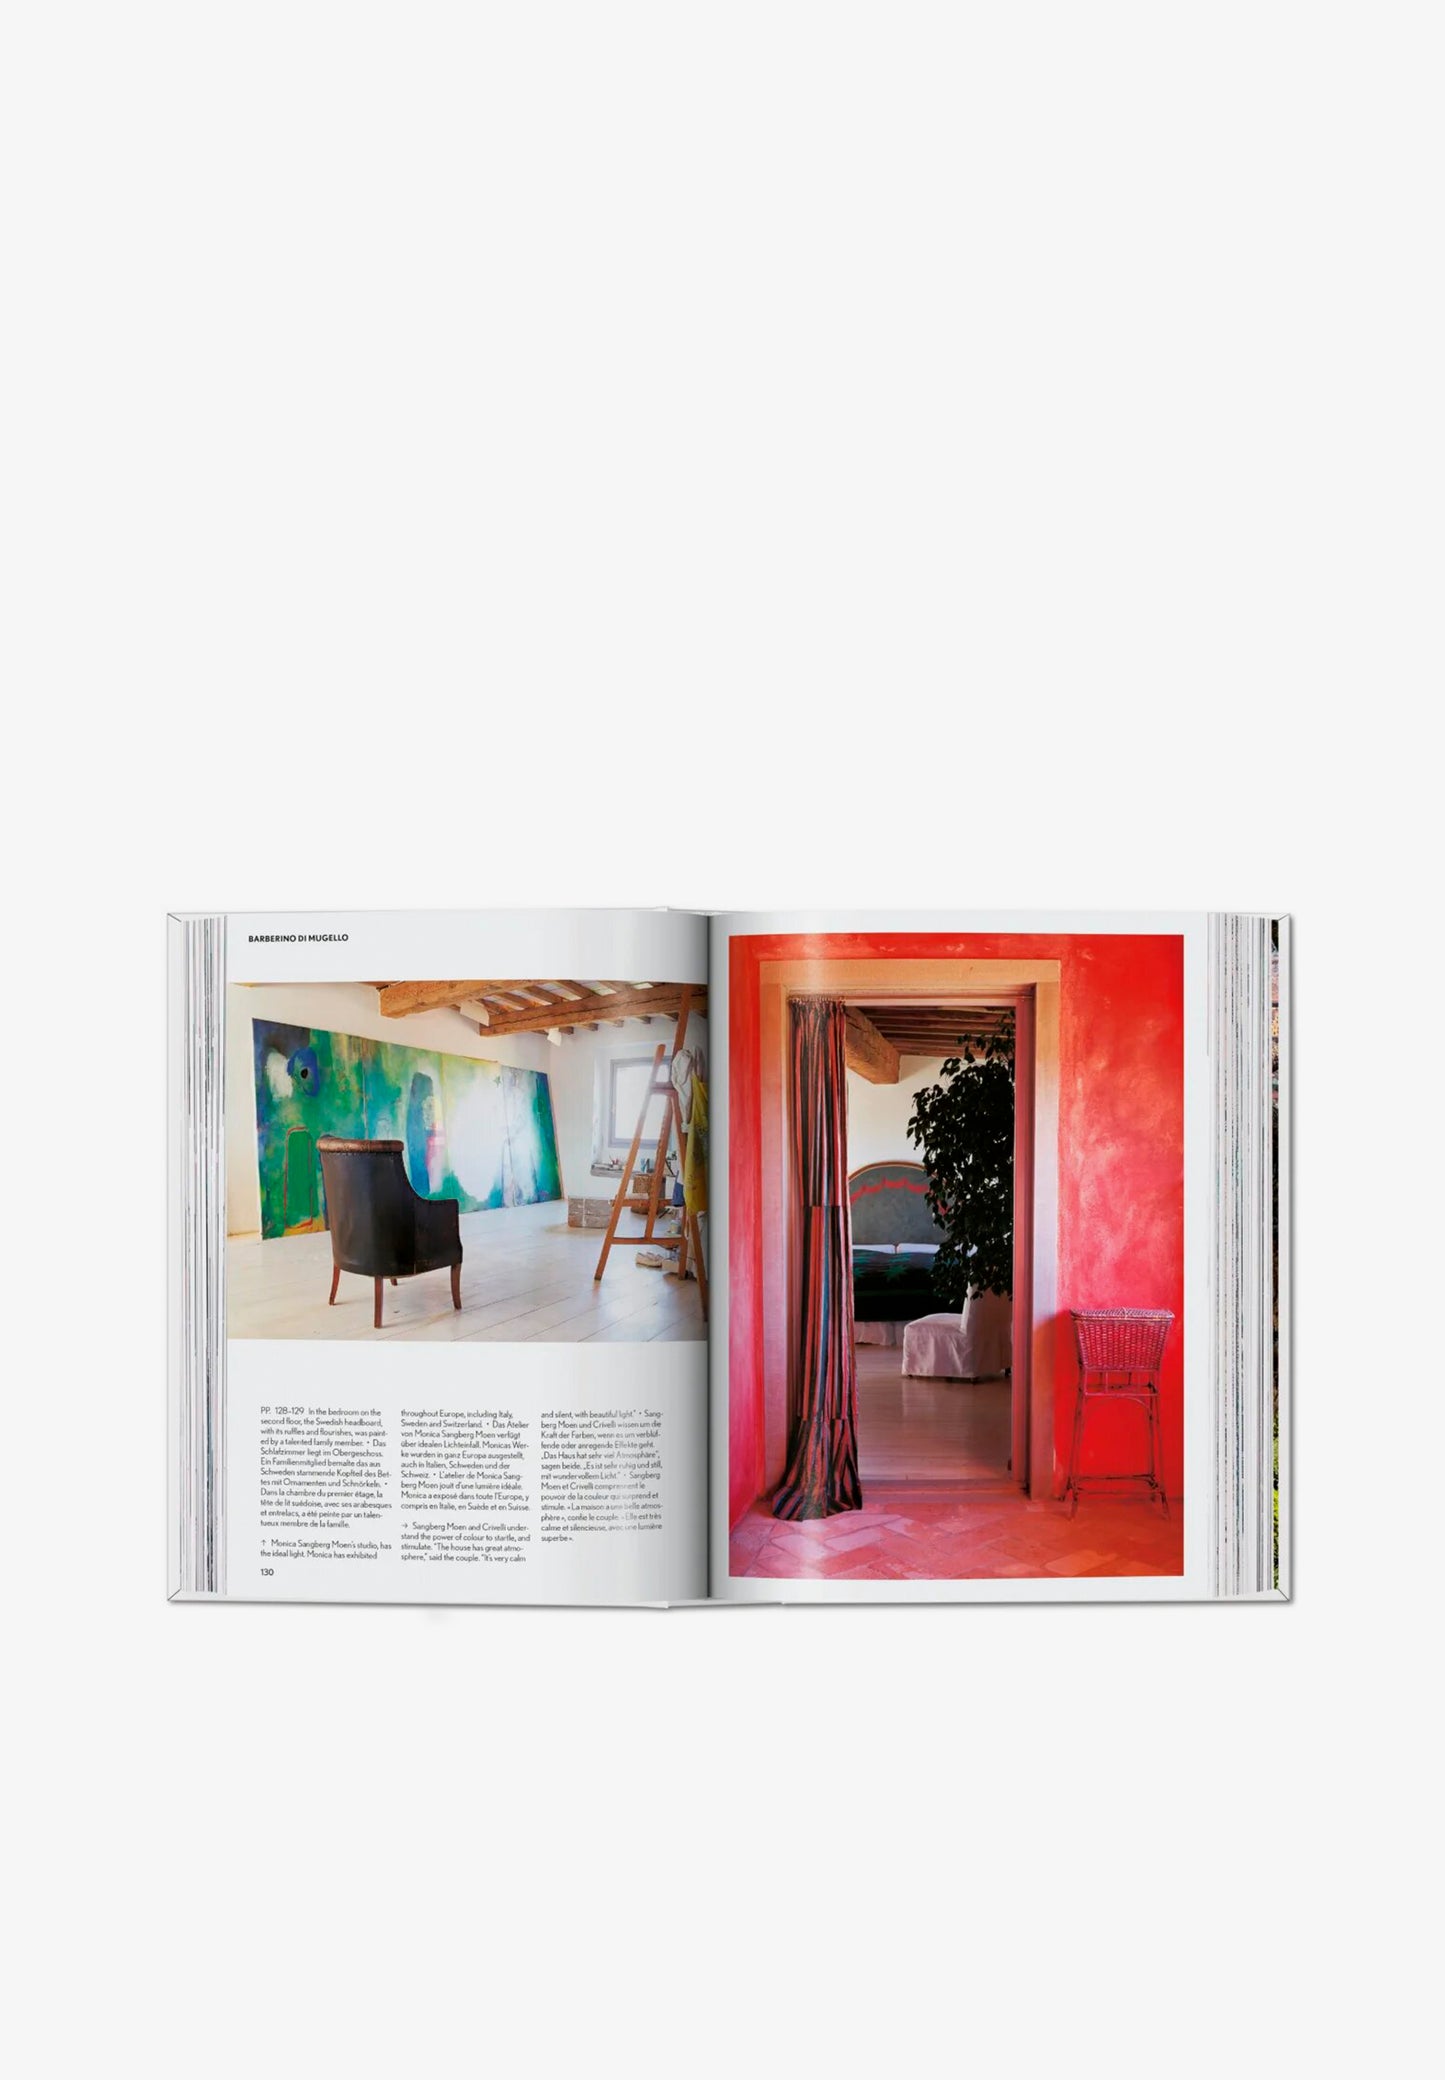 TASCHEN | LIBRO LIVING IN TUSCANY